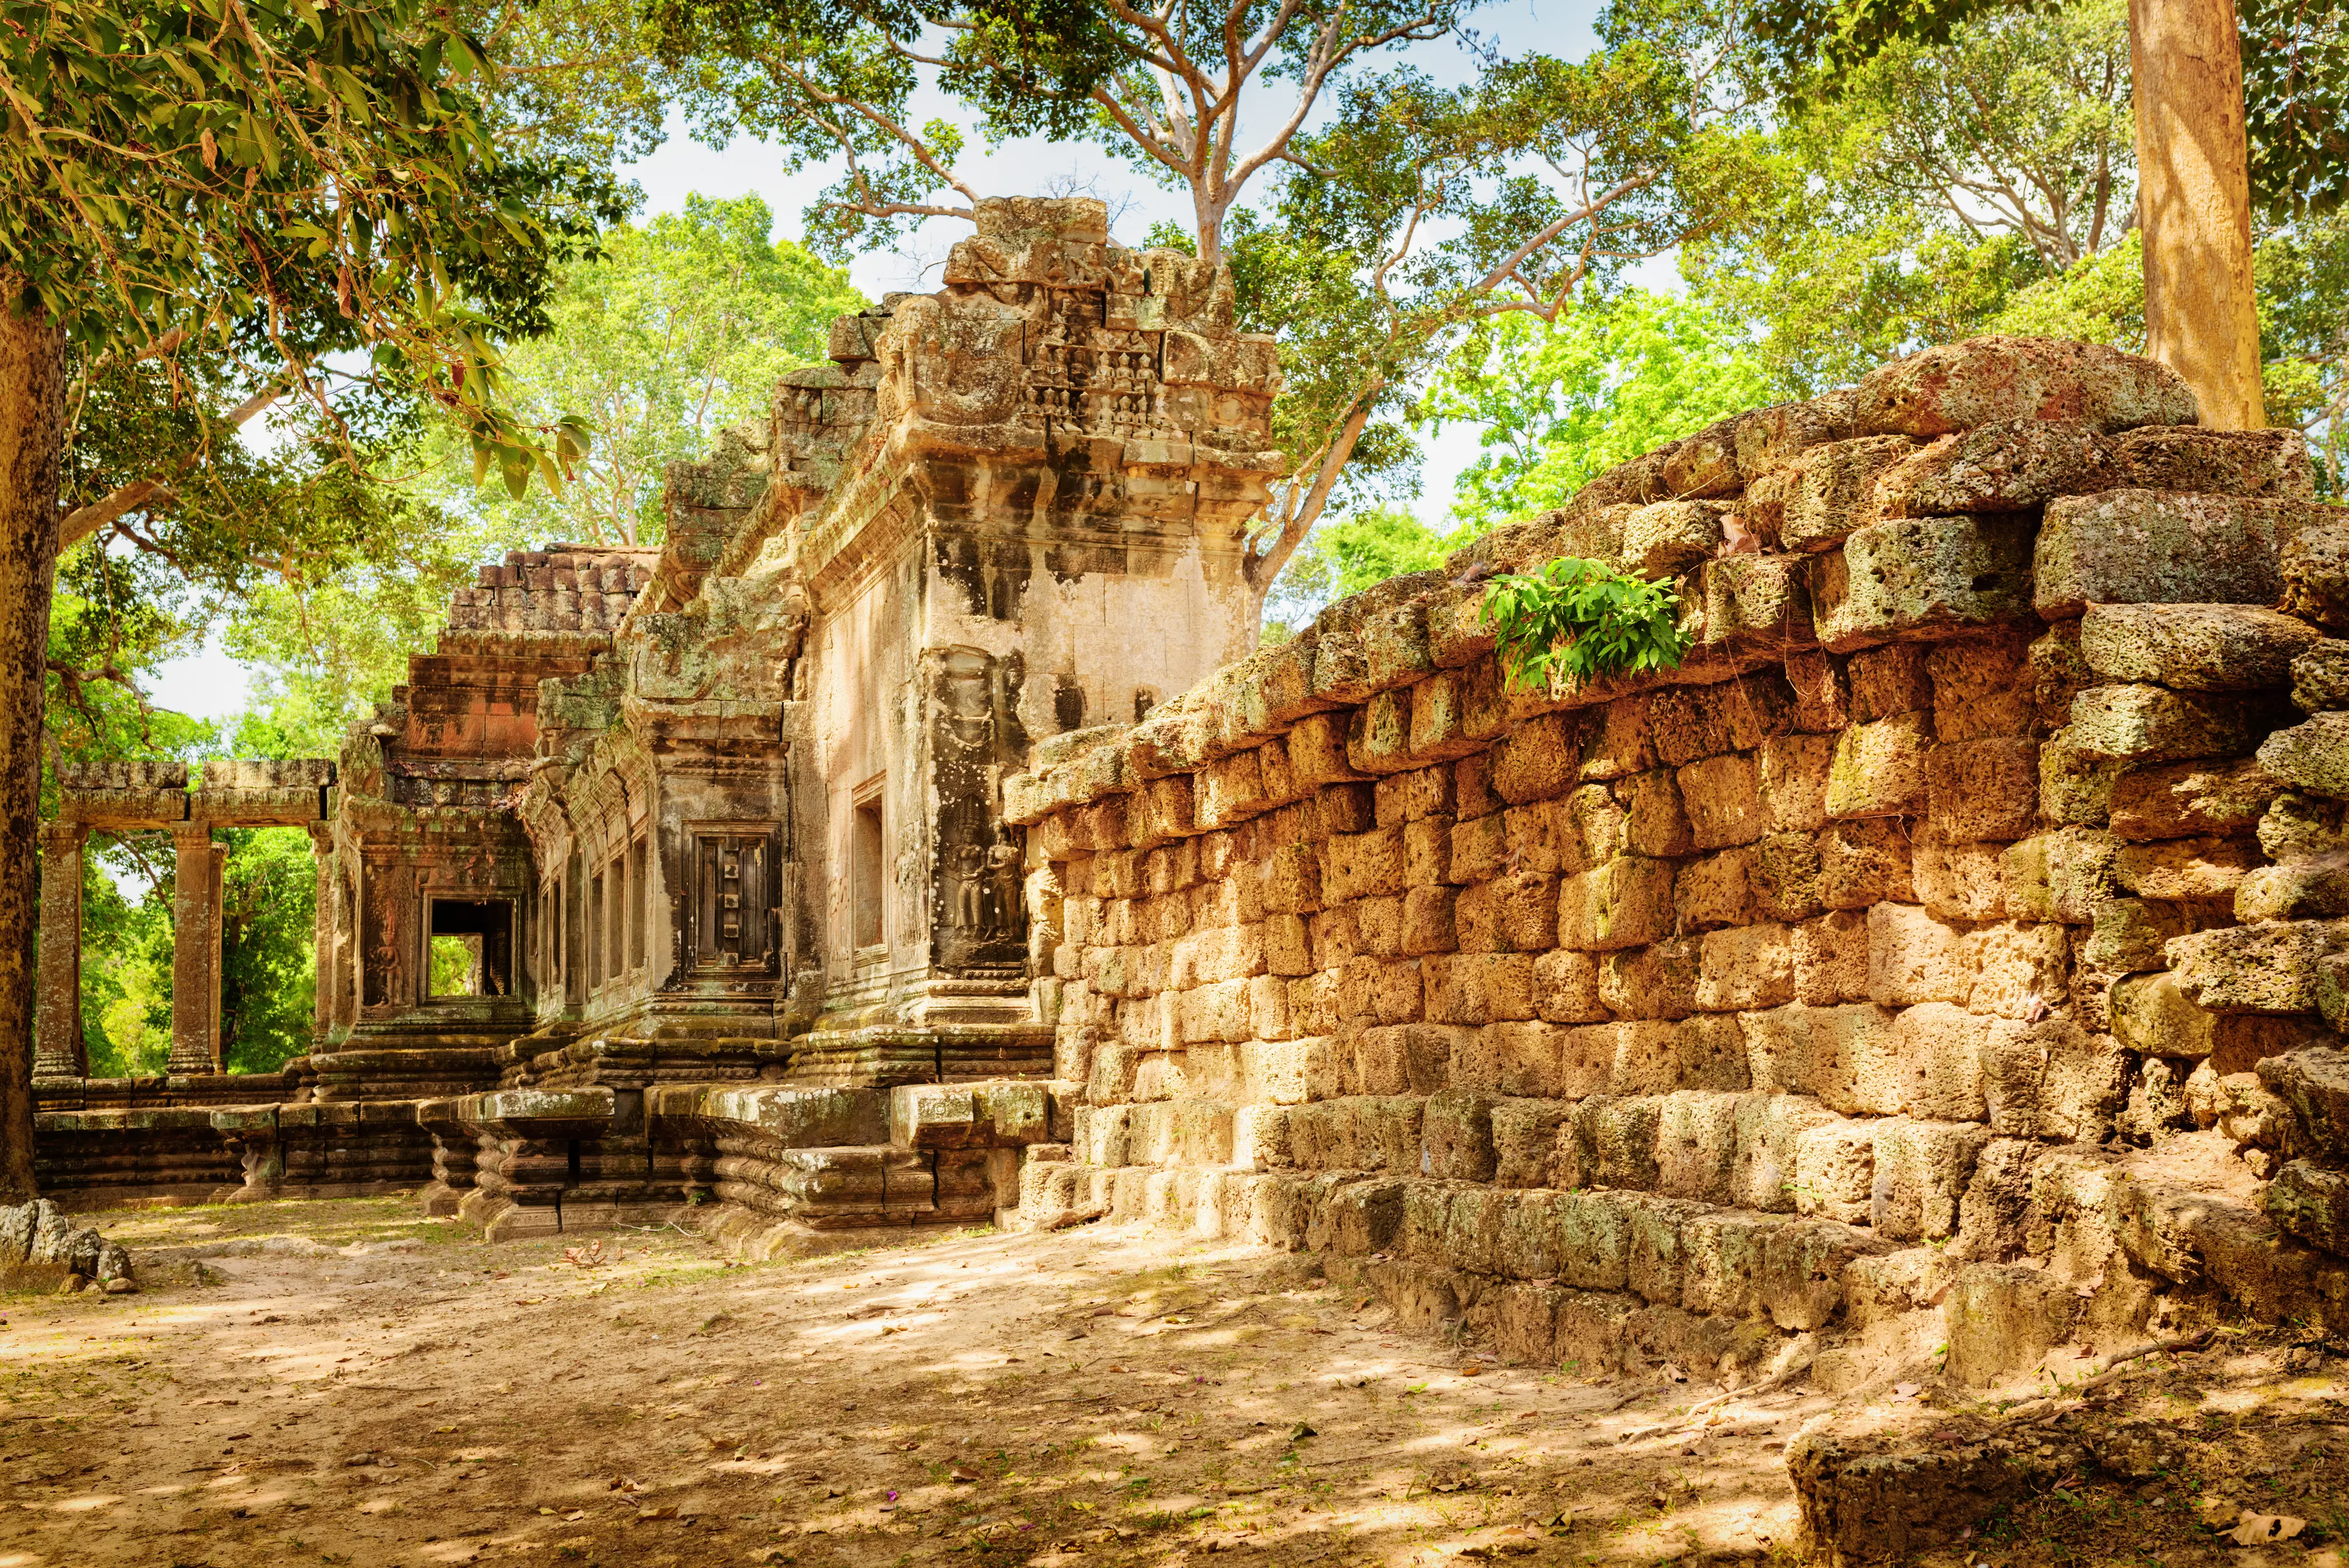 2-Day Angkor Wat Excursion: Sightseeing, Outdoors & Relaxation